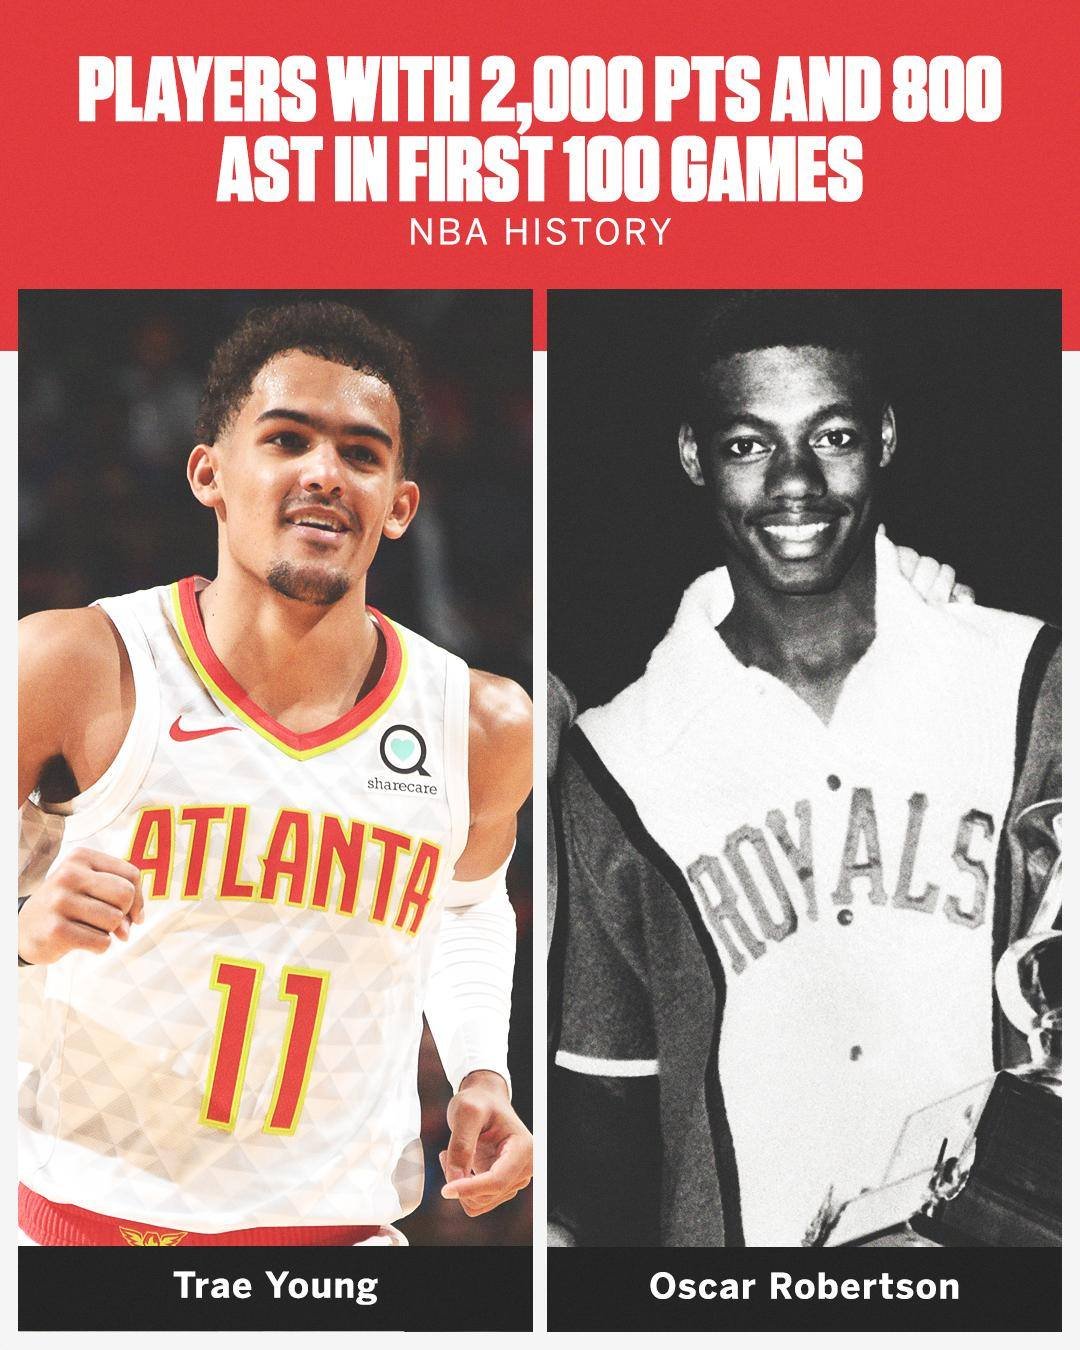 TRAE YOUNG ALL-DEFENSE 2023 on X: "Only 2 Players averaged 25  PPG and 9   APG in 4 straight seasons... Oscar Robertson Trae Young Nobody else has  even done it 3 times. https://t.co/20C7PYICbX" / X